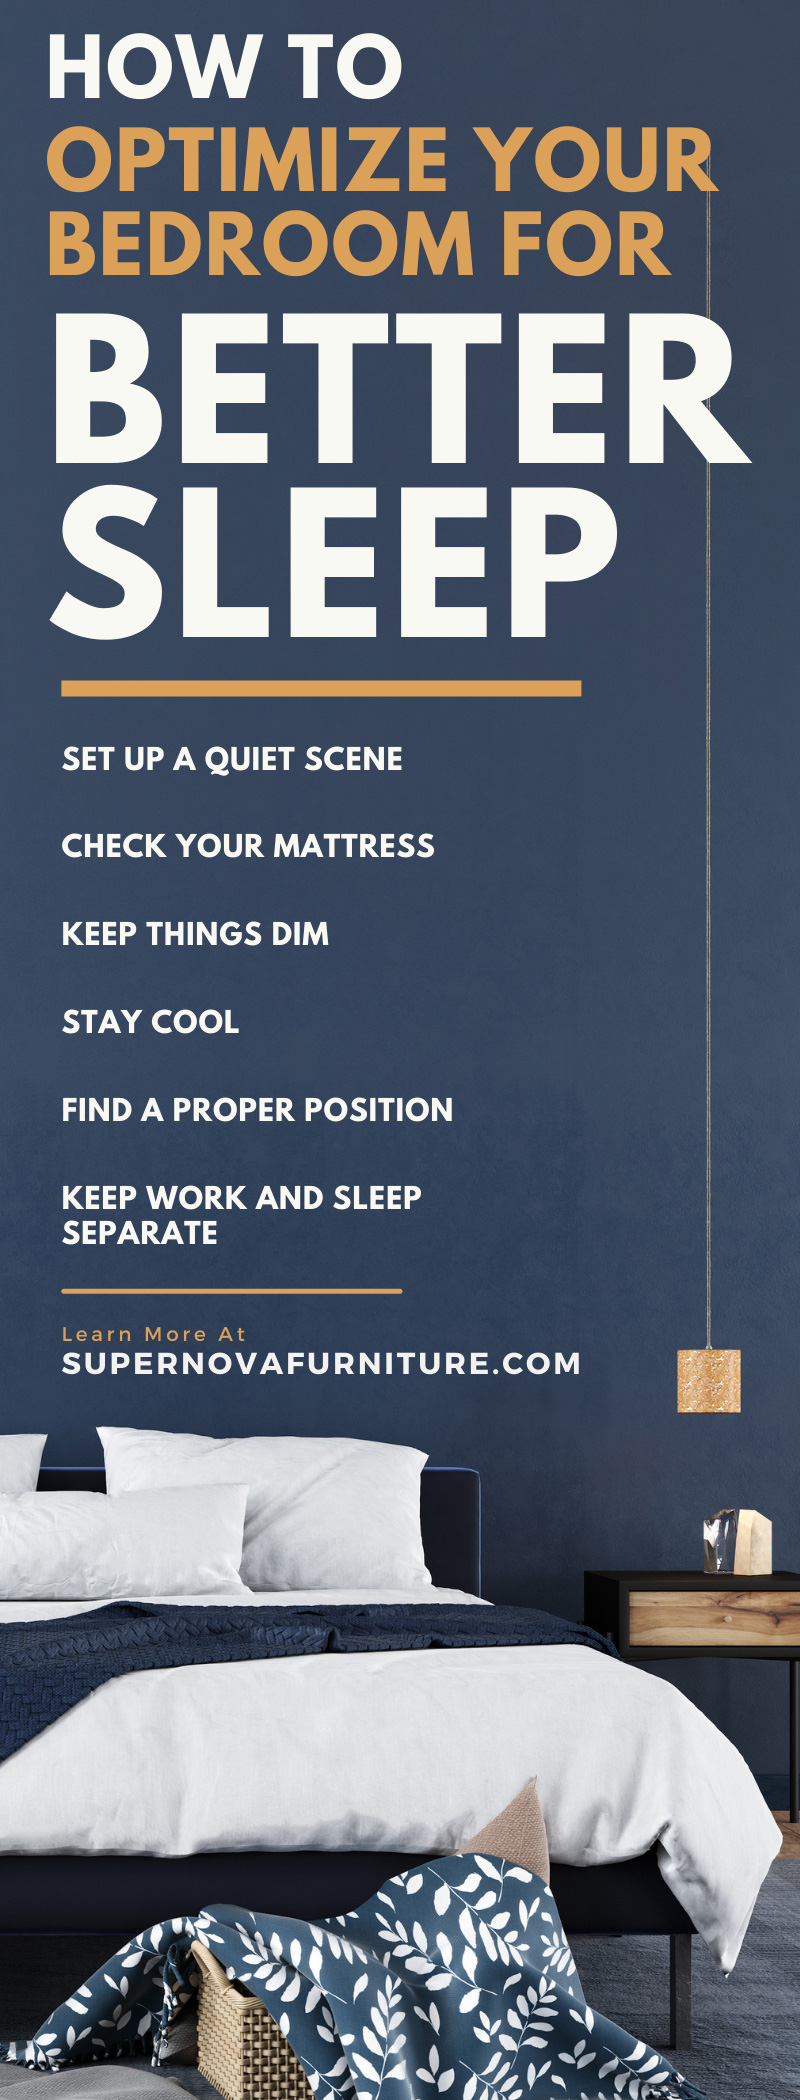 How To Optimize Your Bedroom for Better Sleep